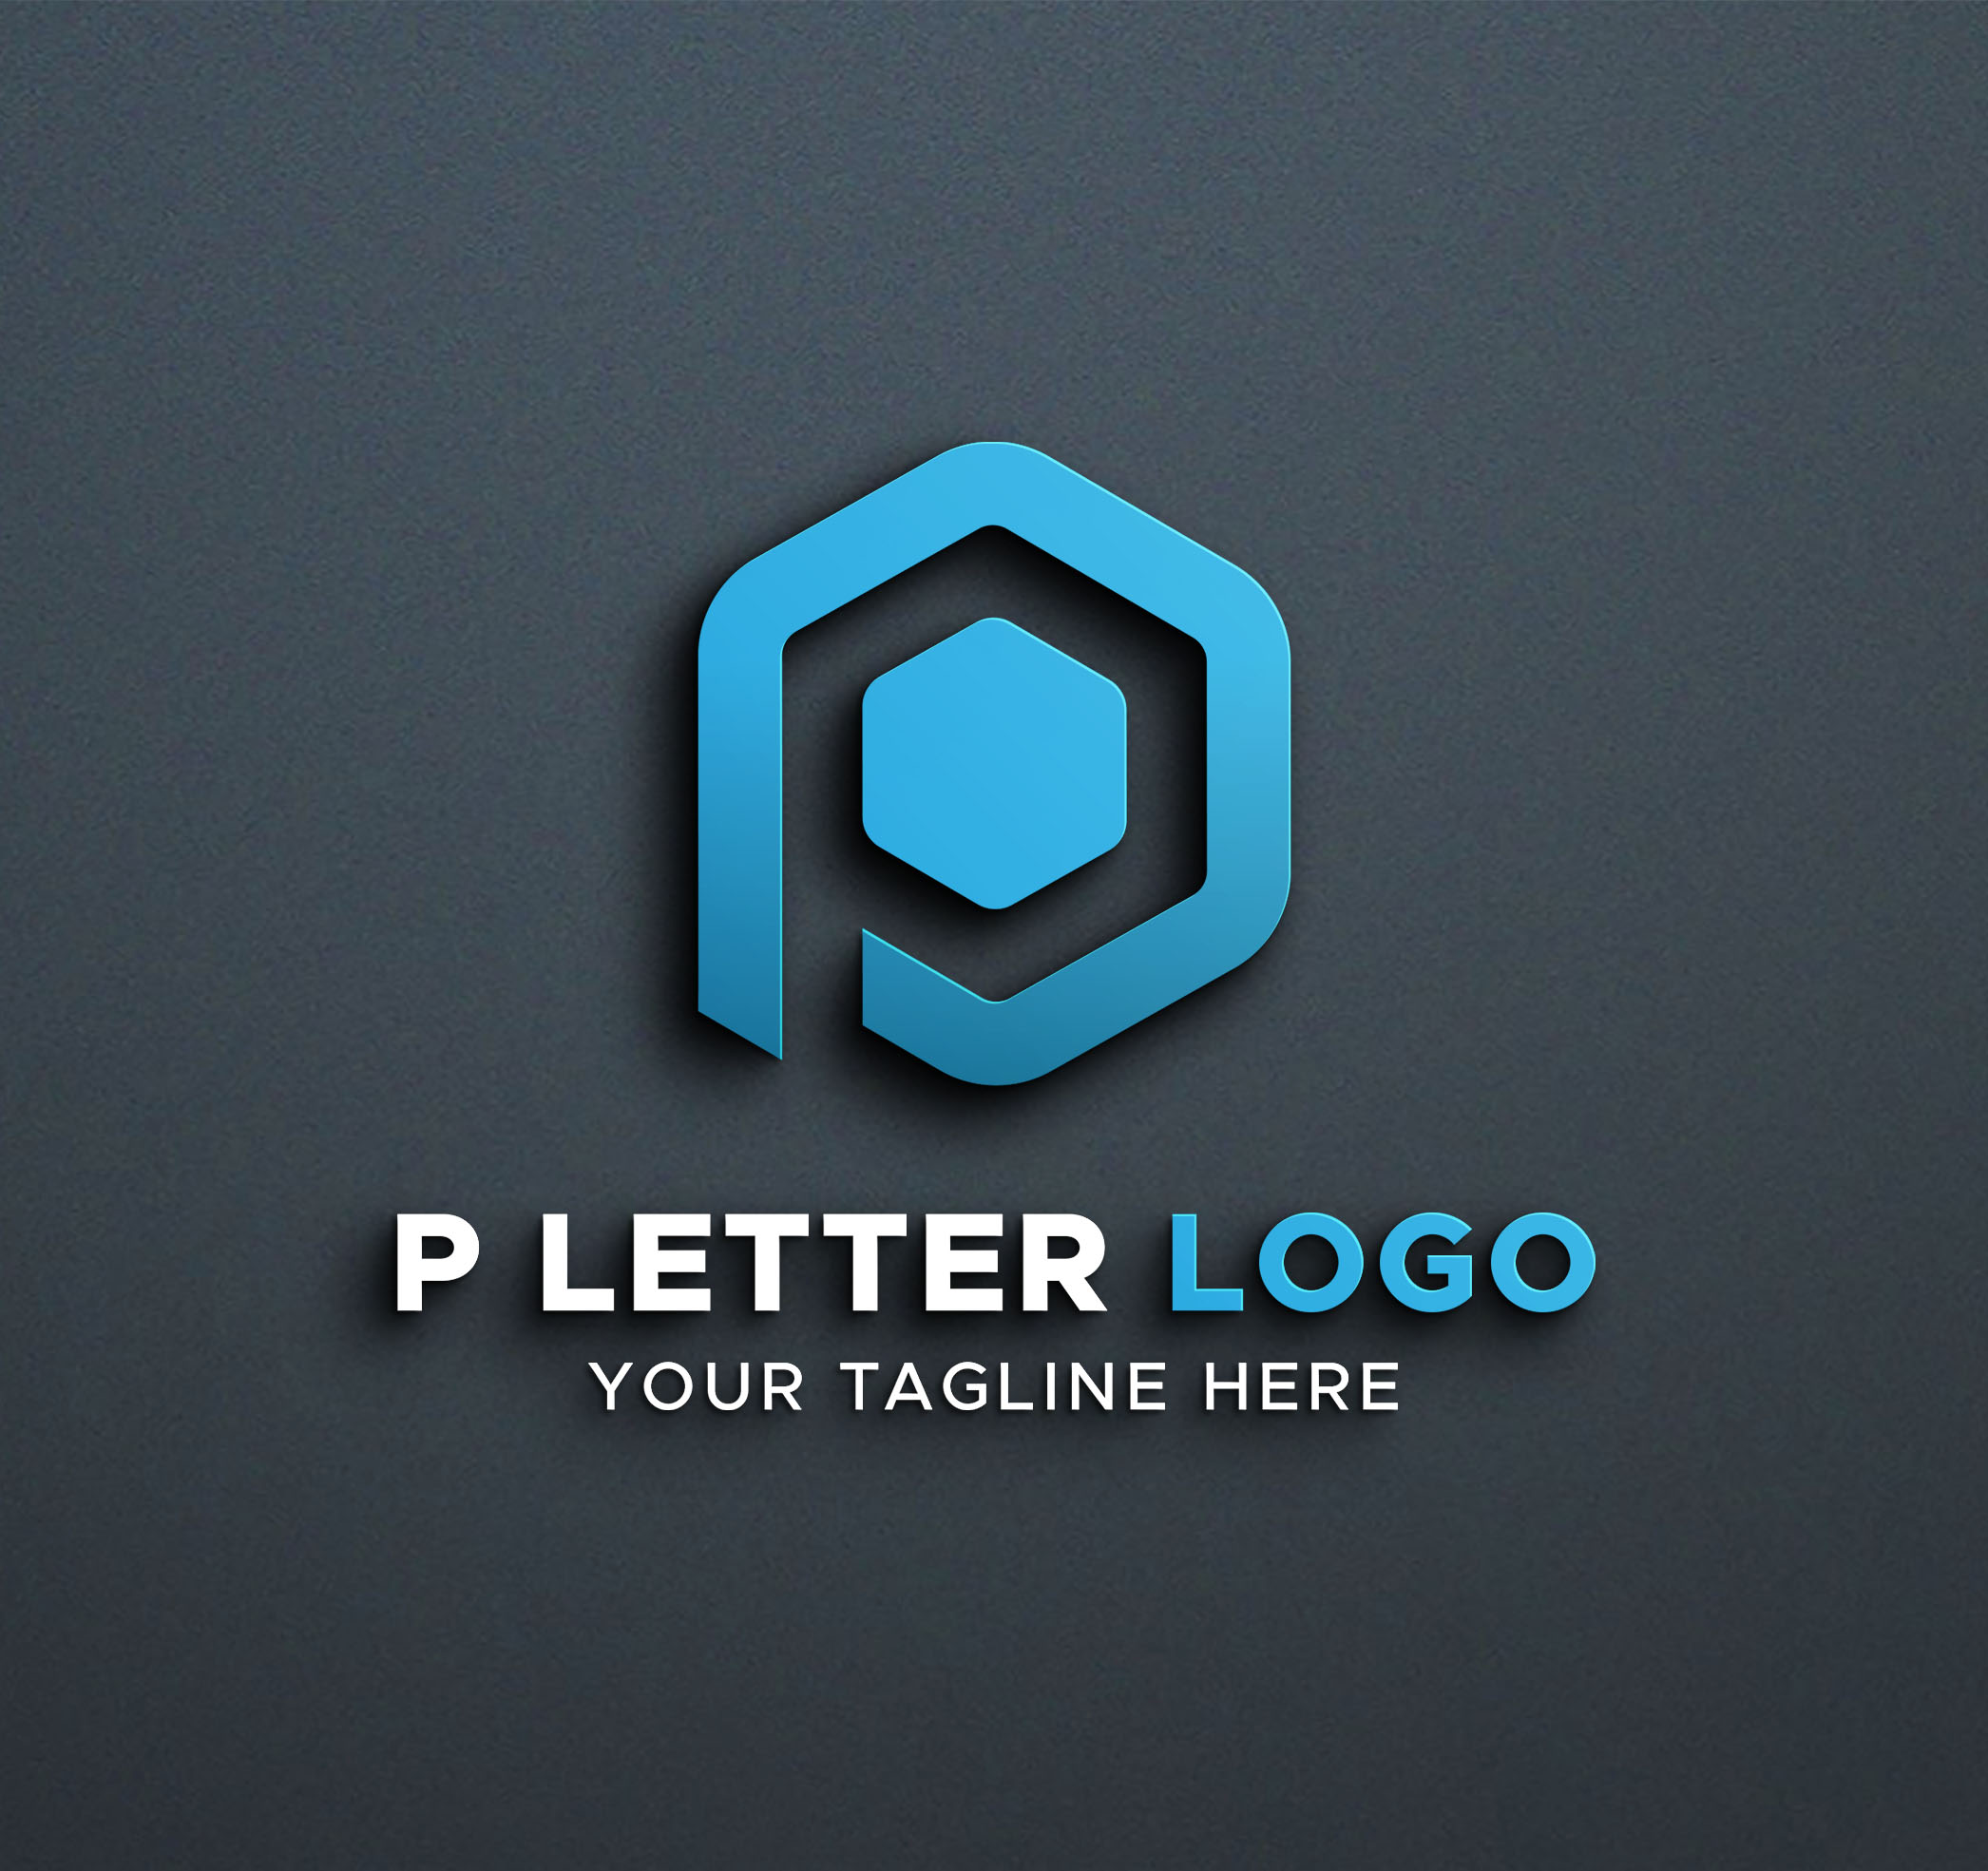 simple and modern 3d logo mockup